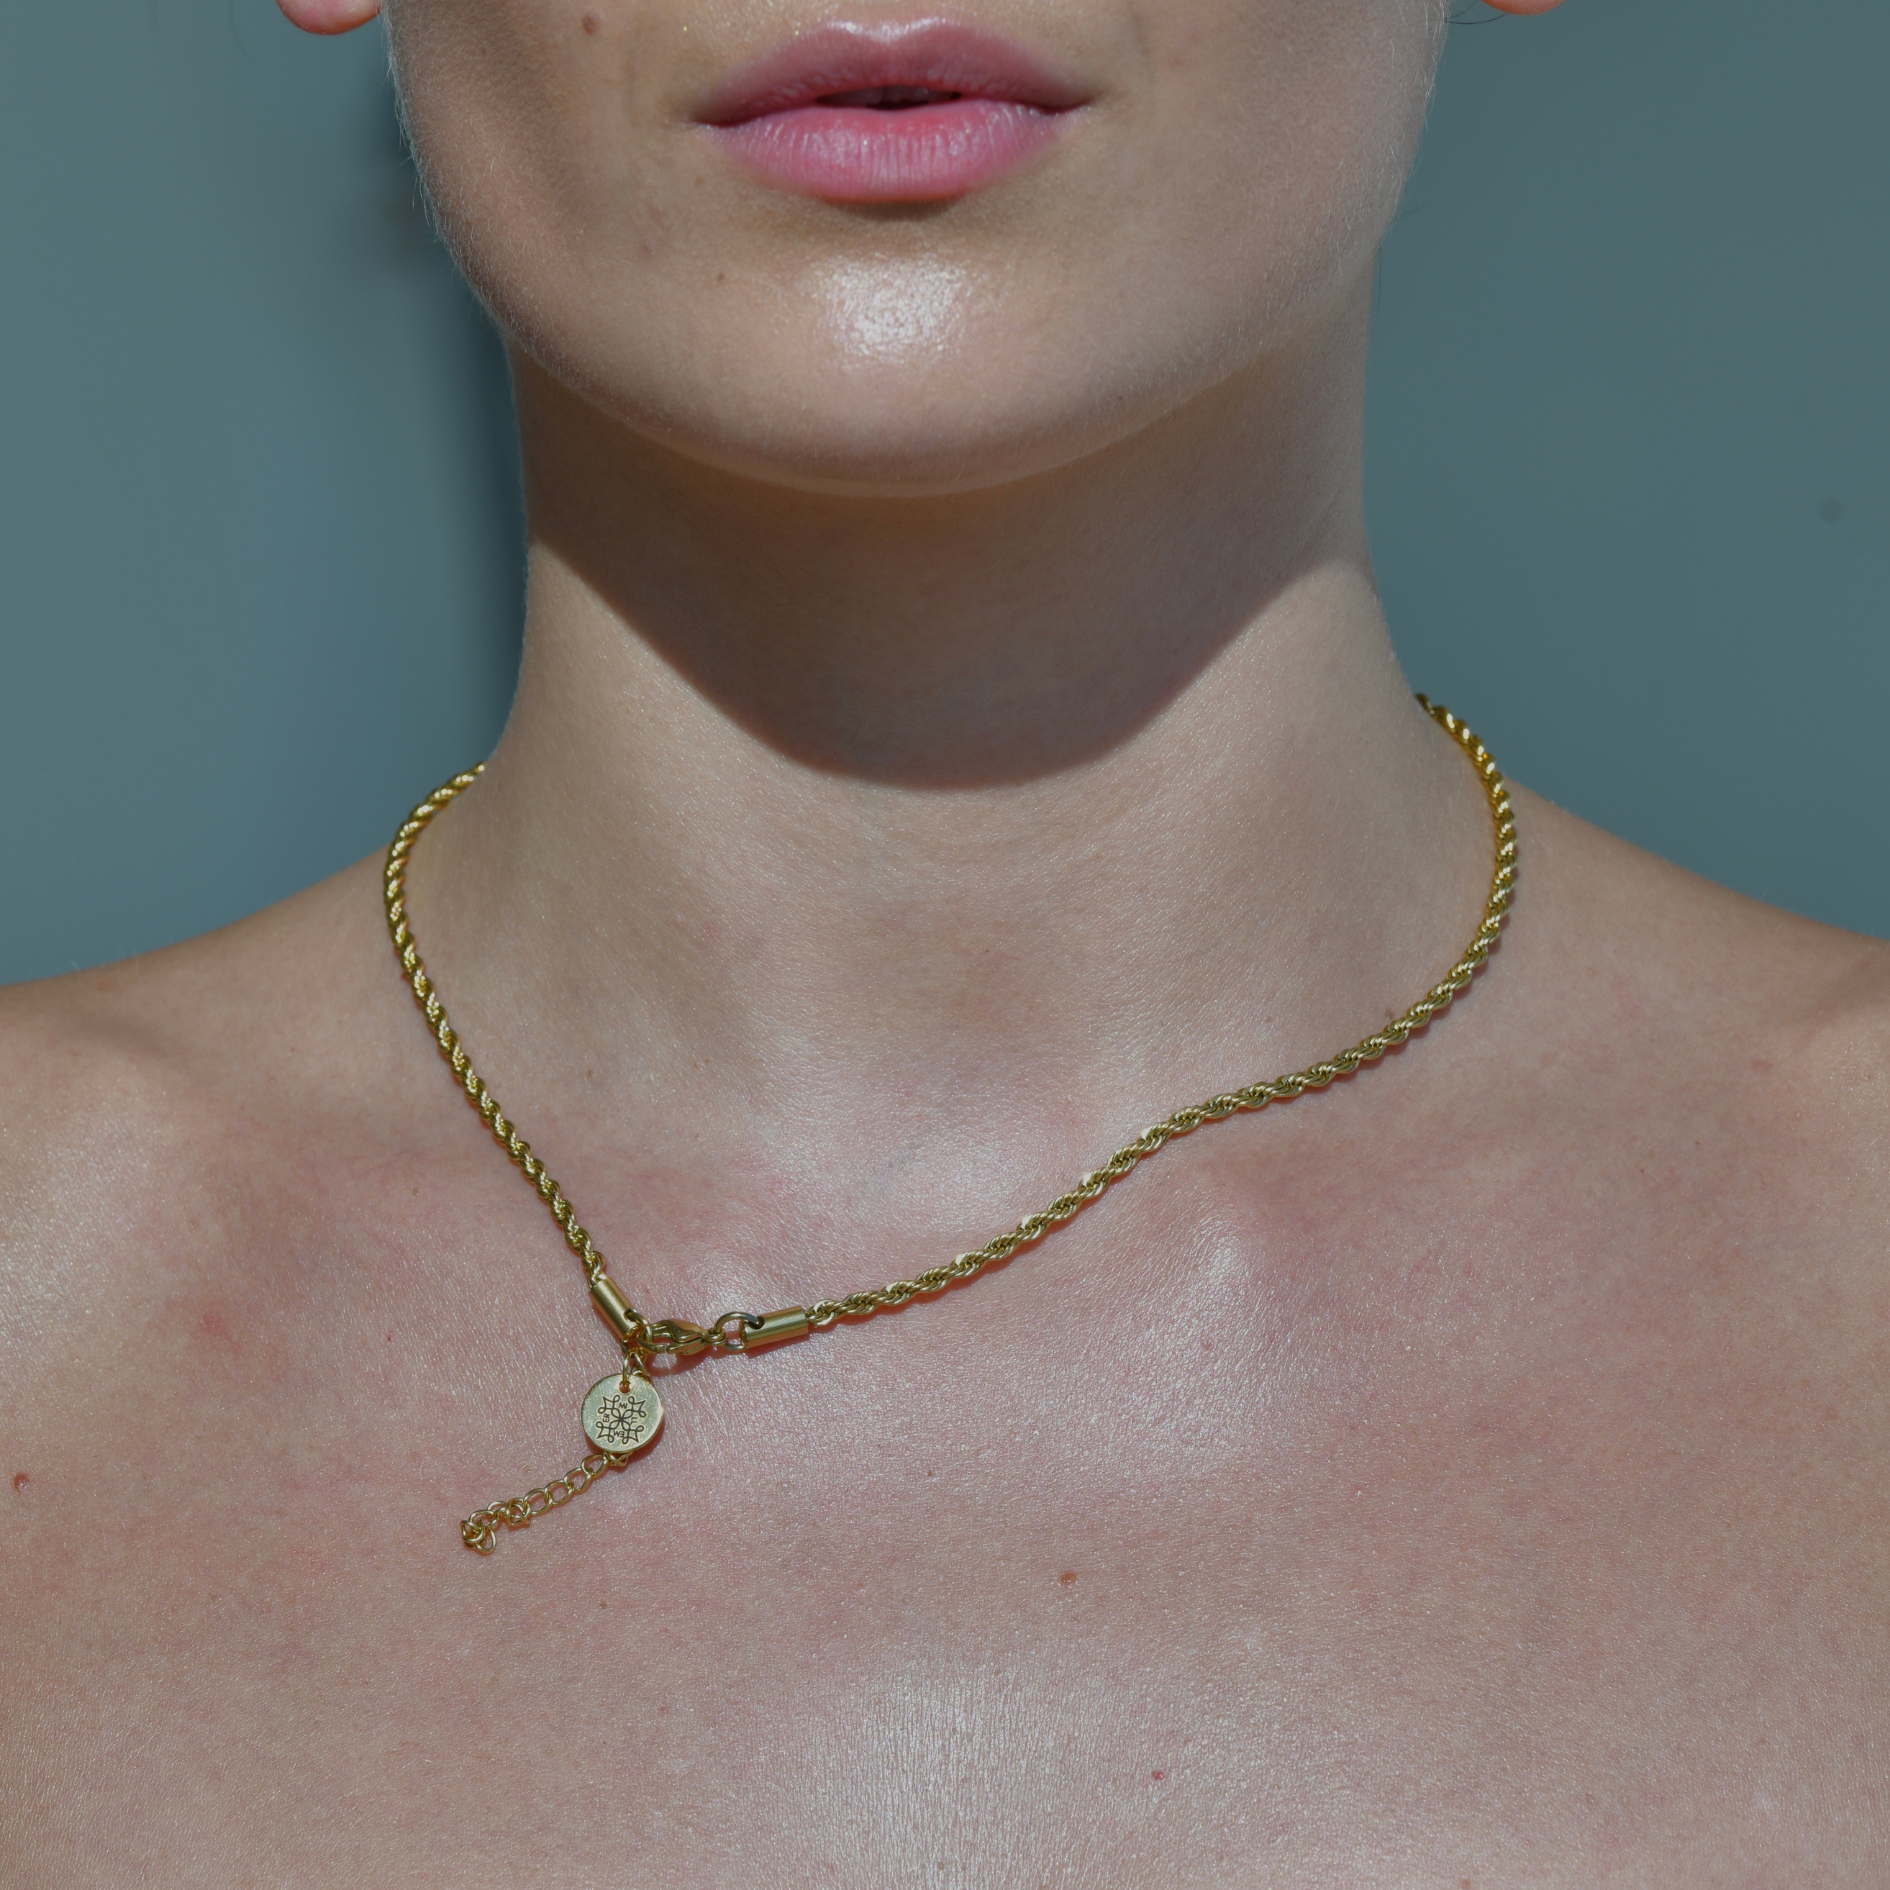 Gold chain in the texture of a rope. Robe B Chain Necklace.